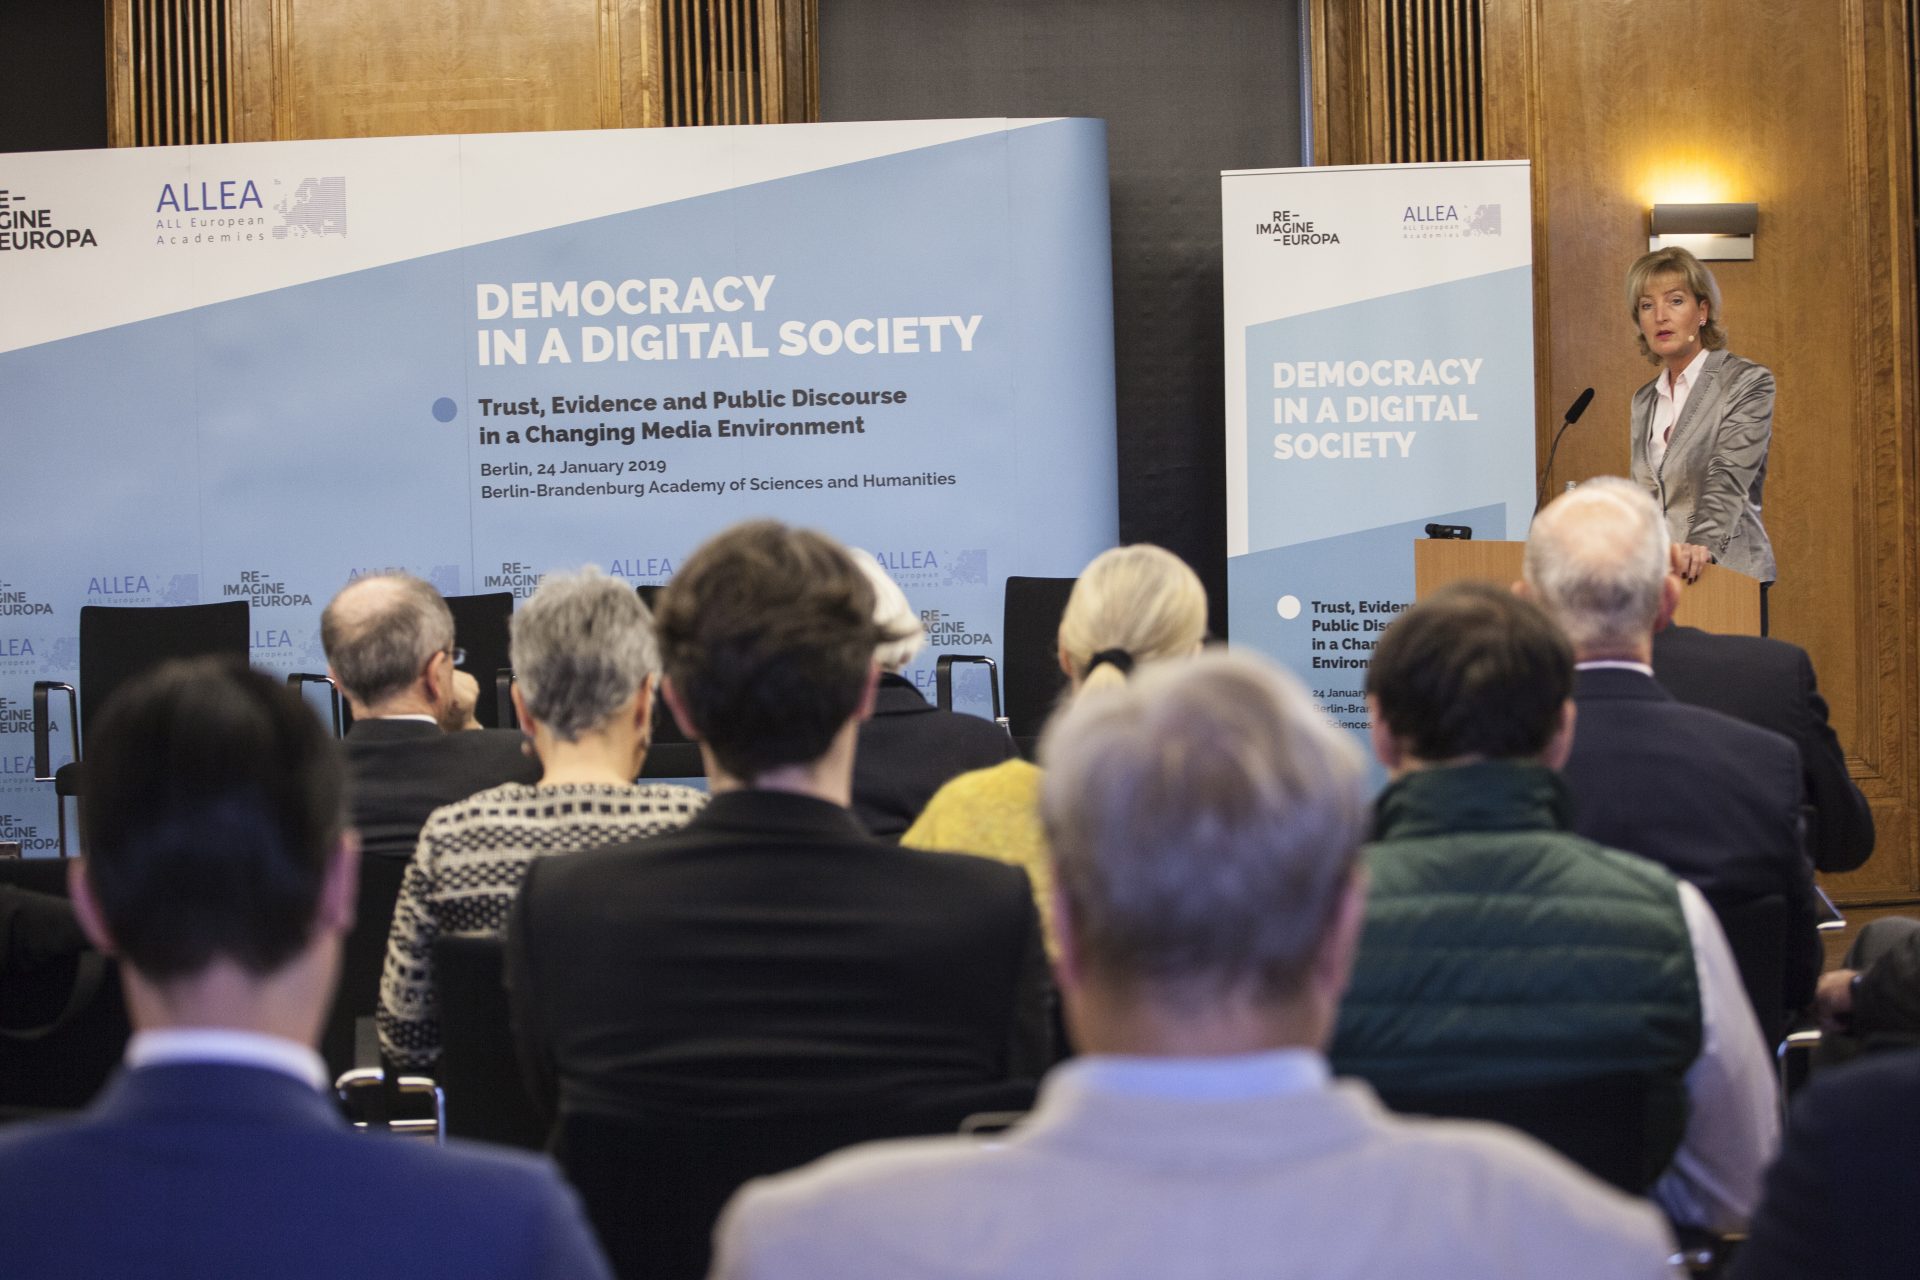 Professor Christiane Woopen delivering a speech at the Democracy in a digital society conference